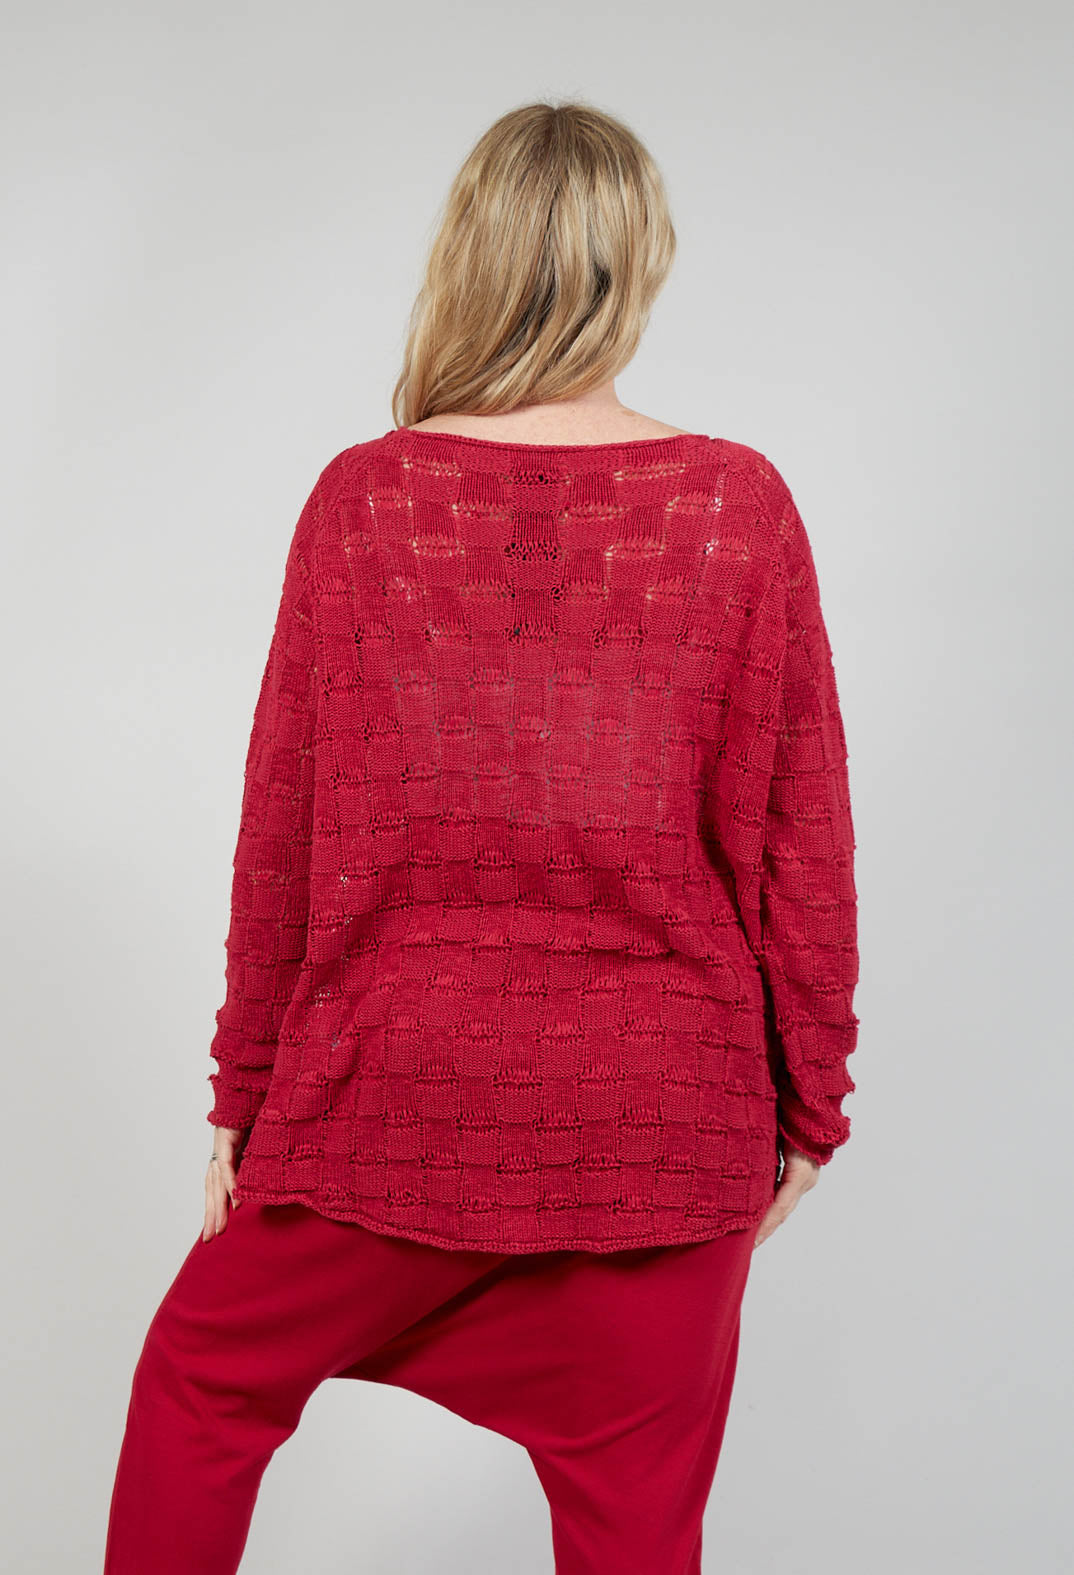 Jumper with Square Detail Knit in Chili